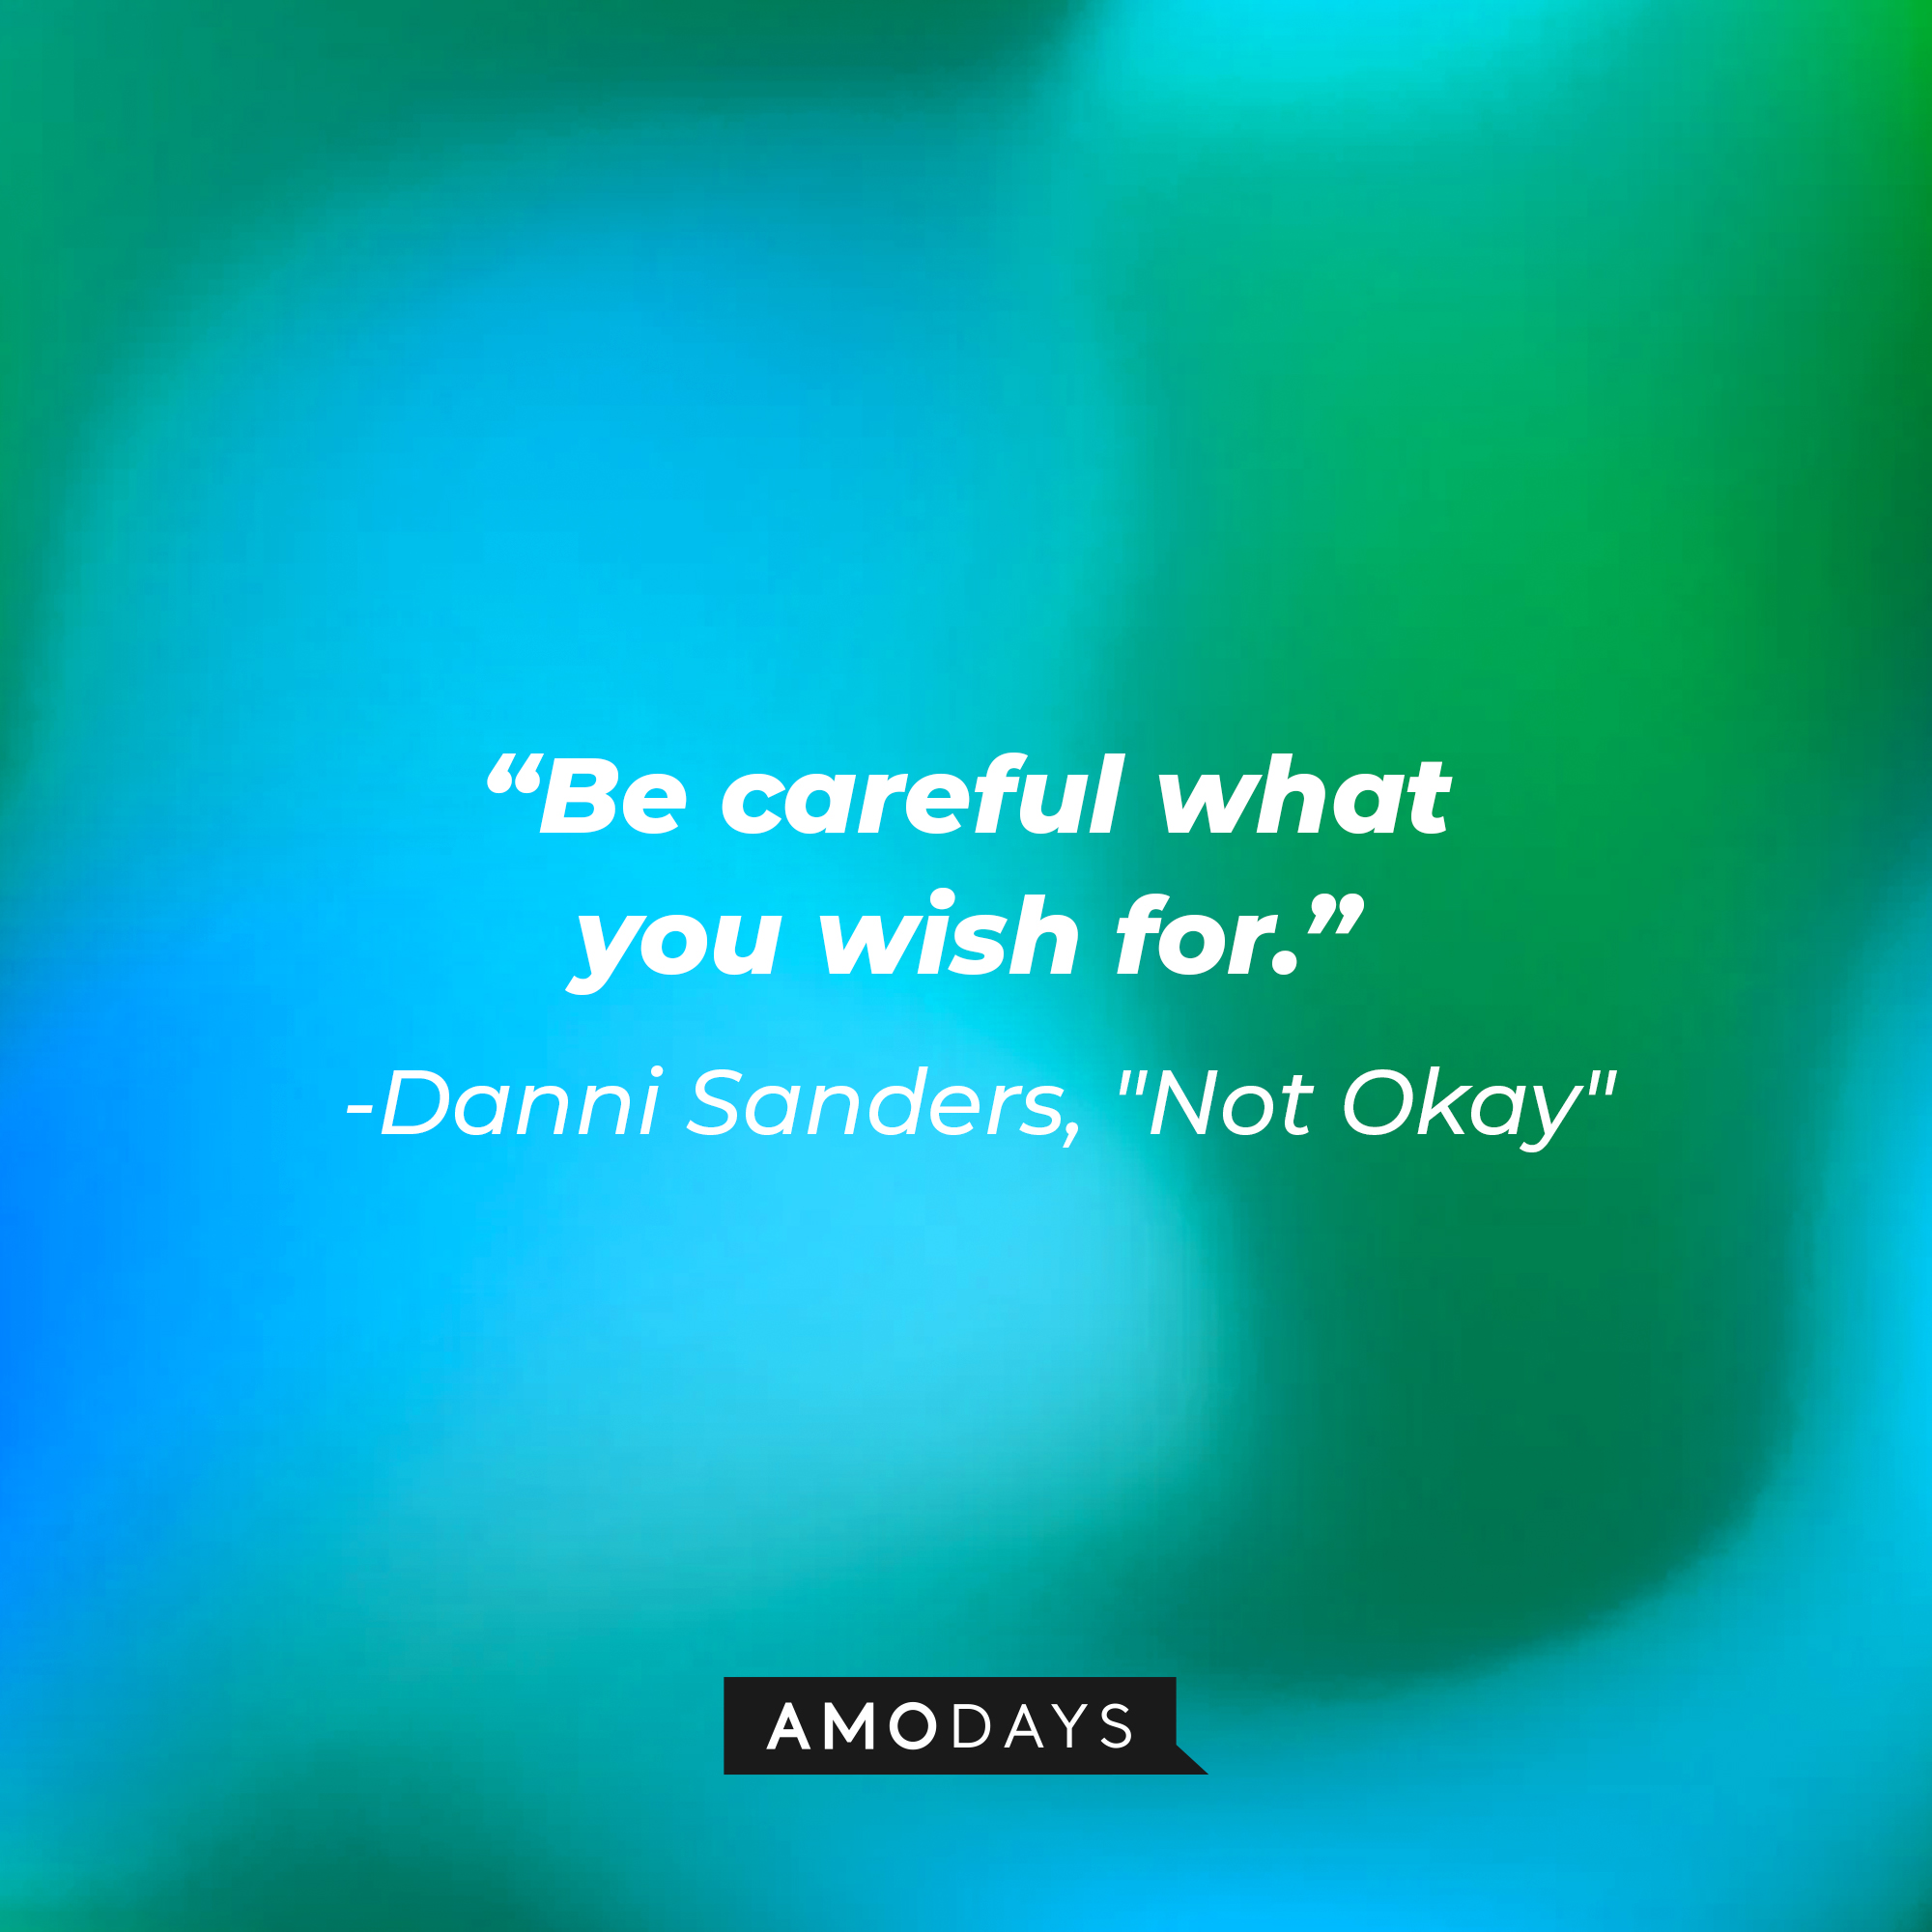 Danni Sanders' quote: "Be careful what you wish for." | Source: AmoDays